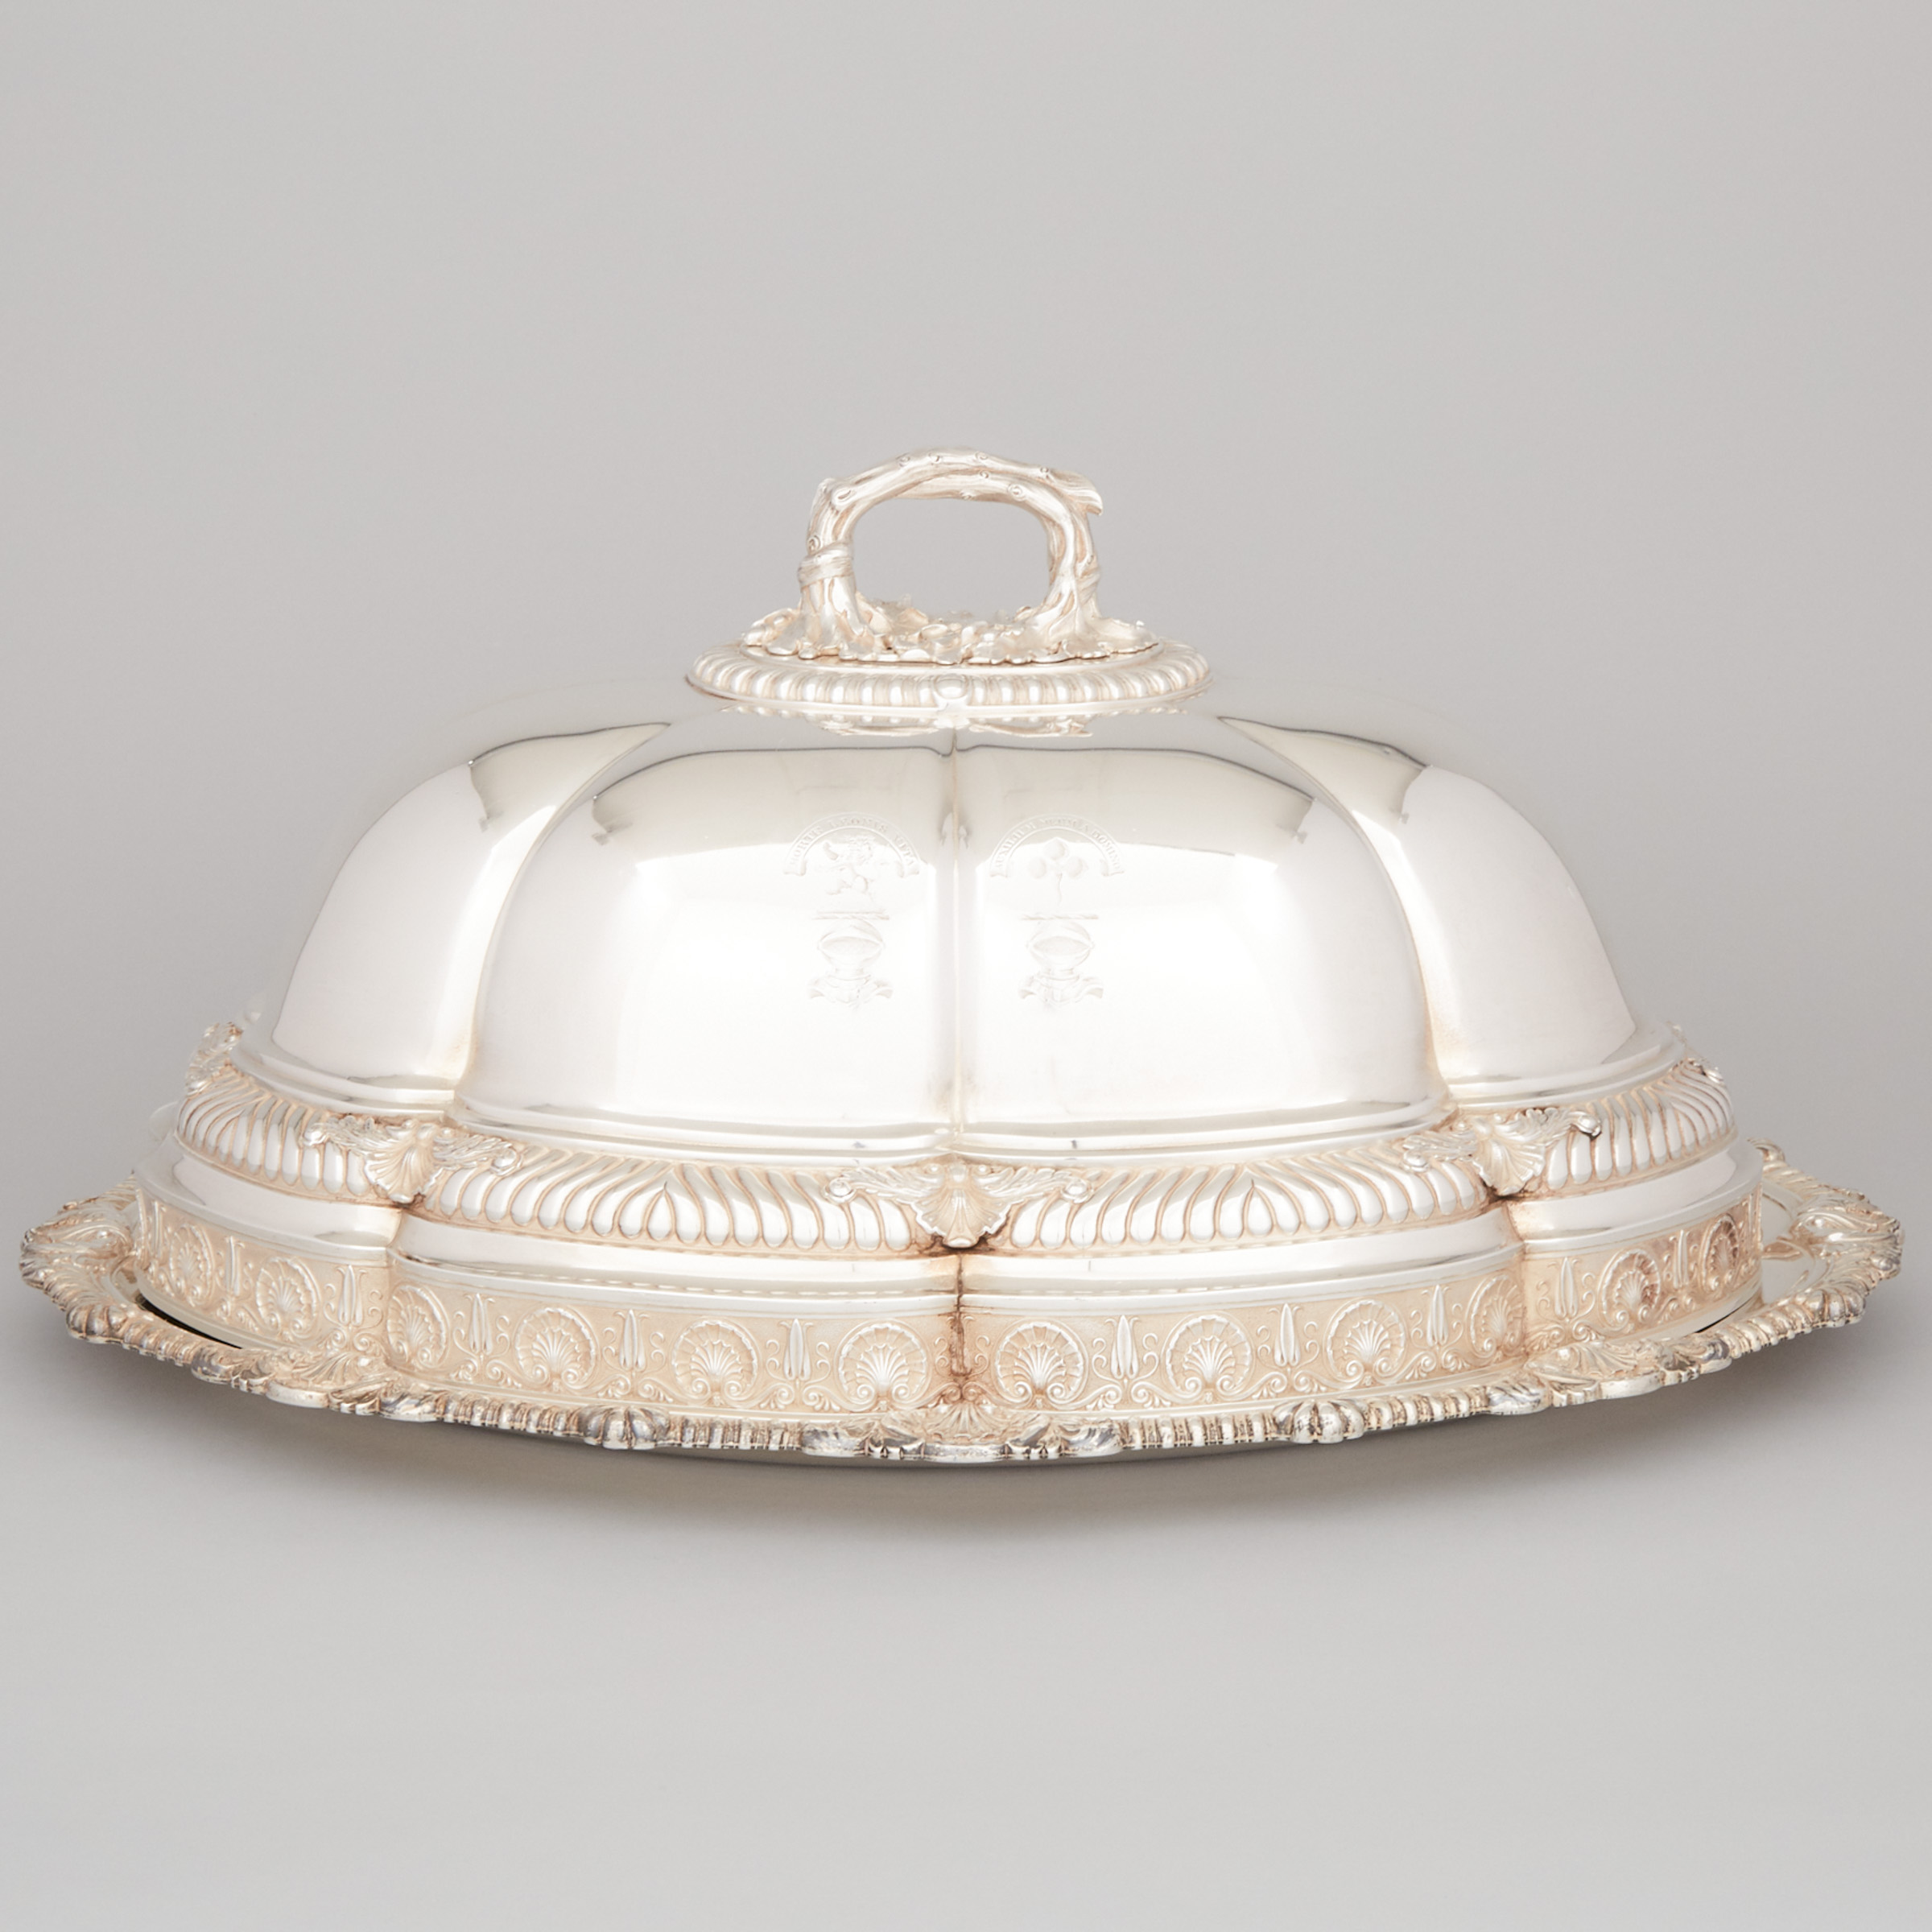 George IV Silver Oval Meat Dish and Cover, John Bridge, London, 1824